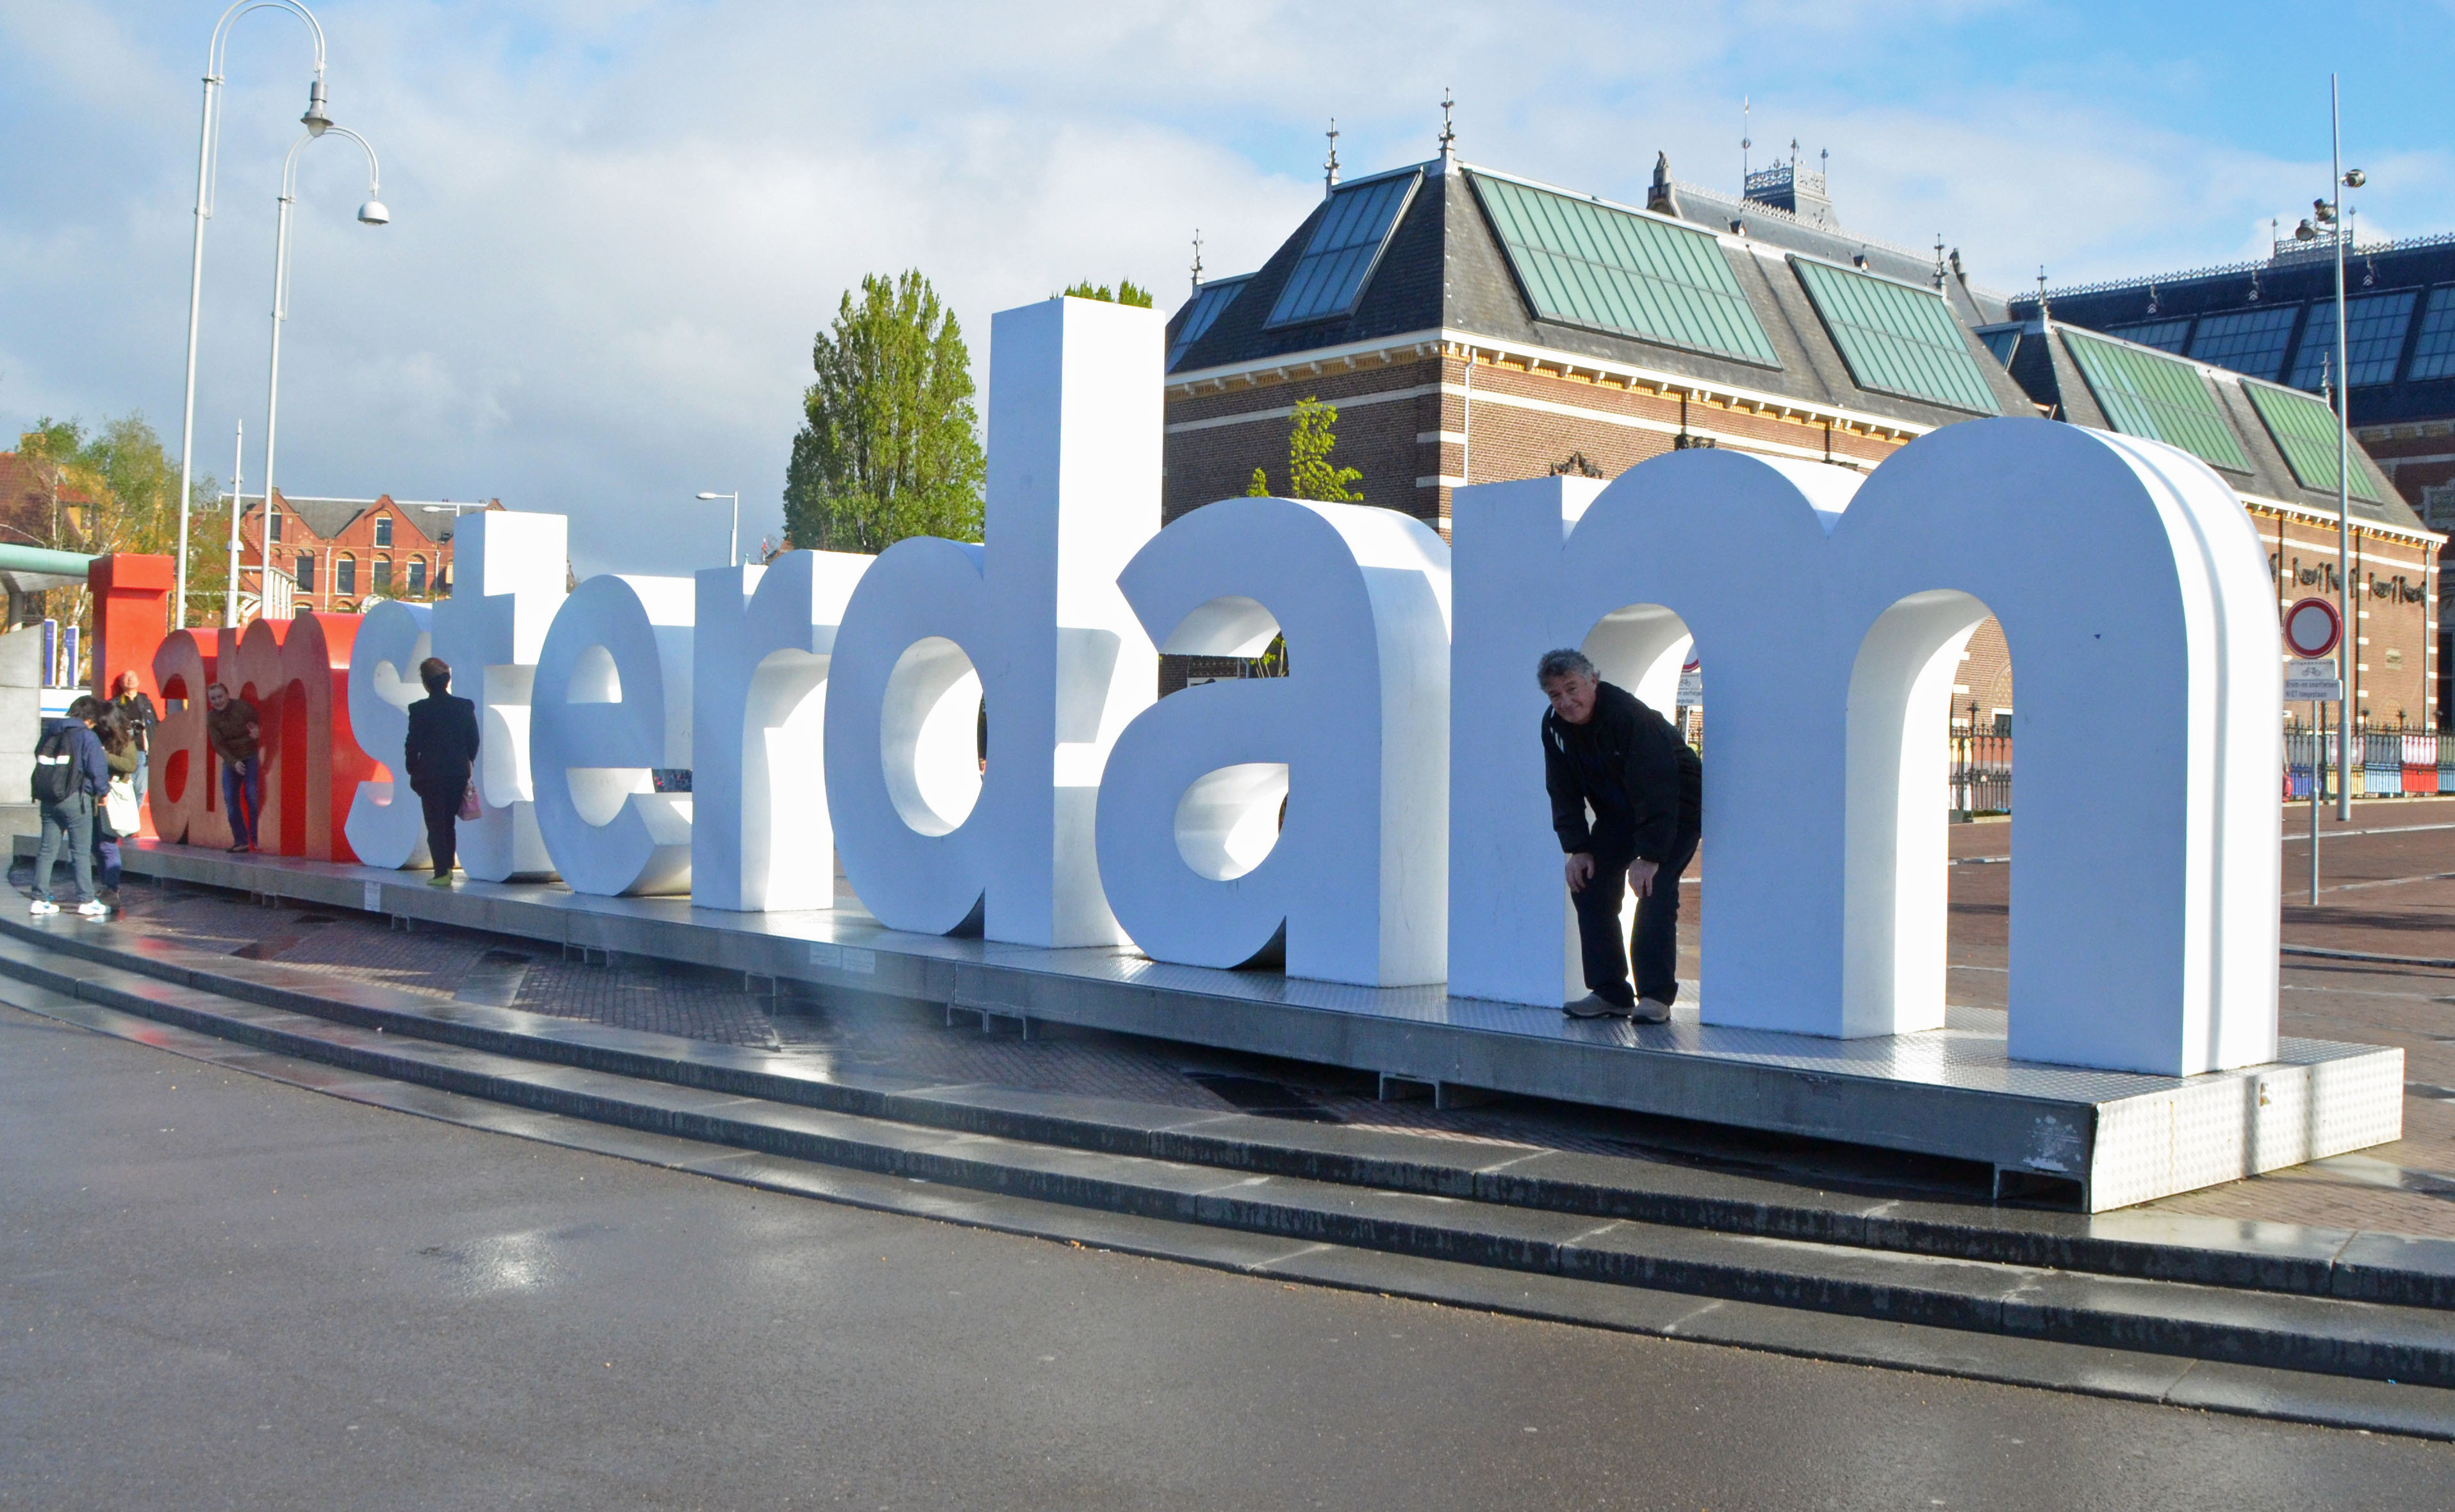 In Amsterdam outside the Rijksmuseum